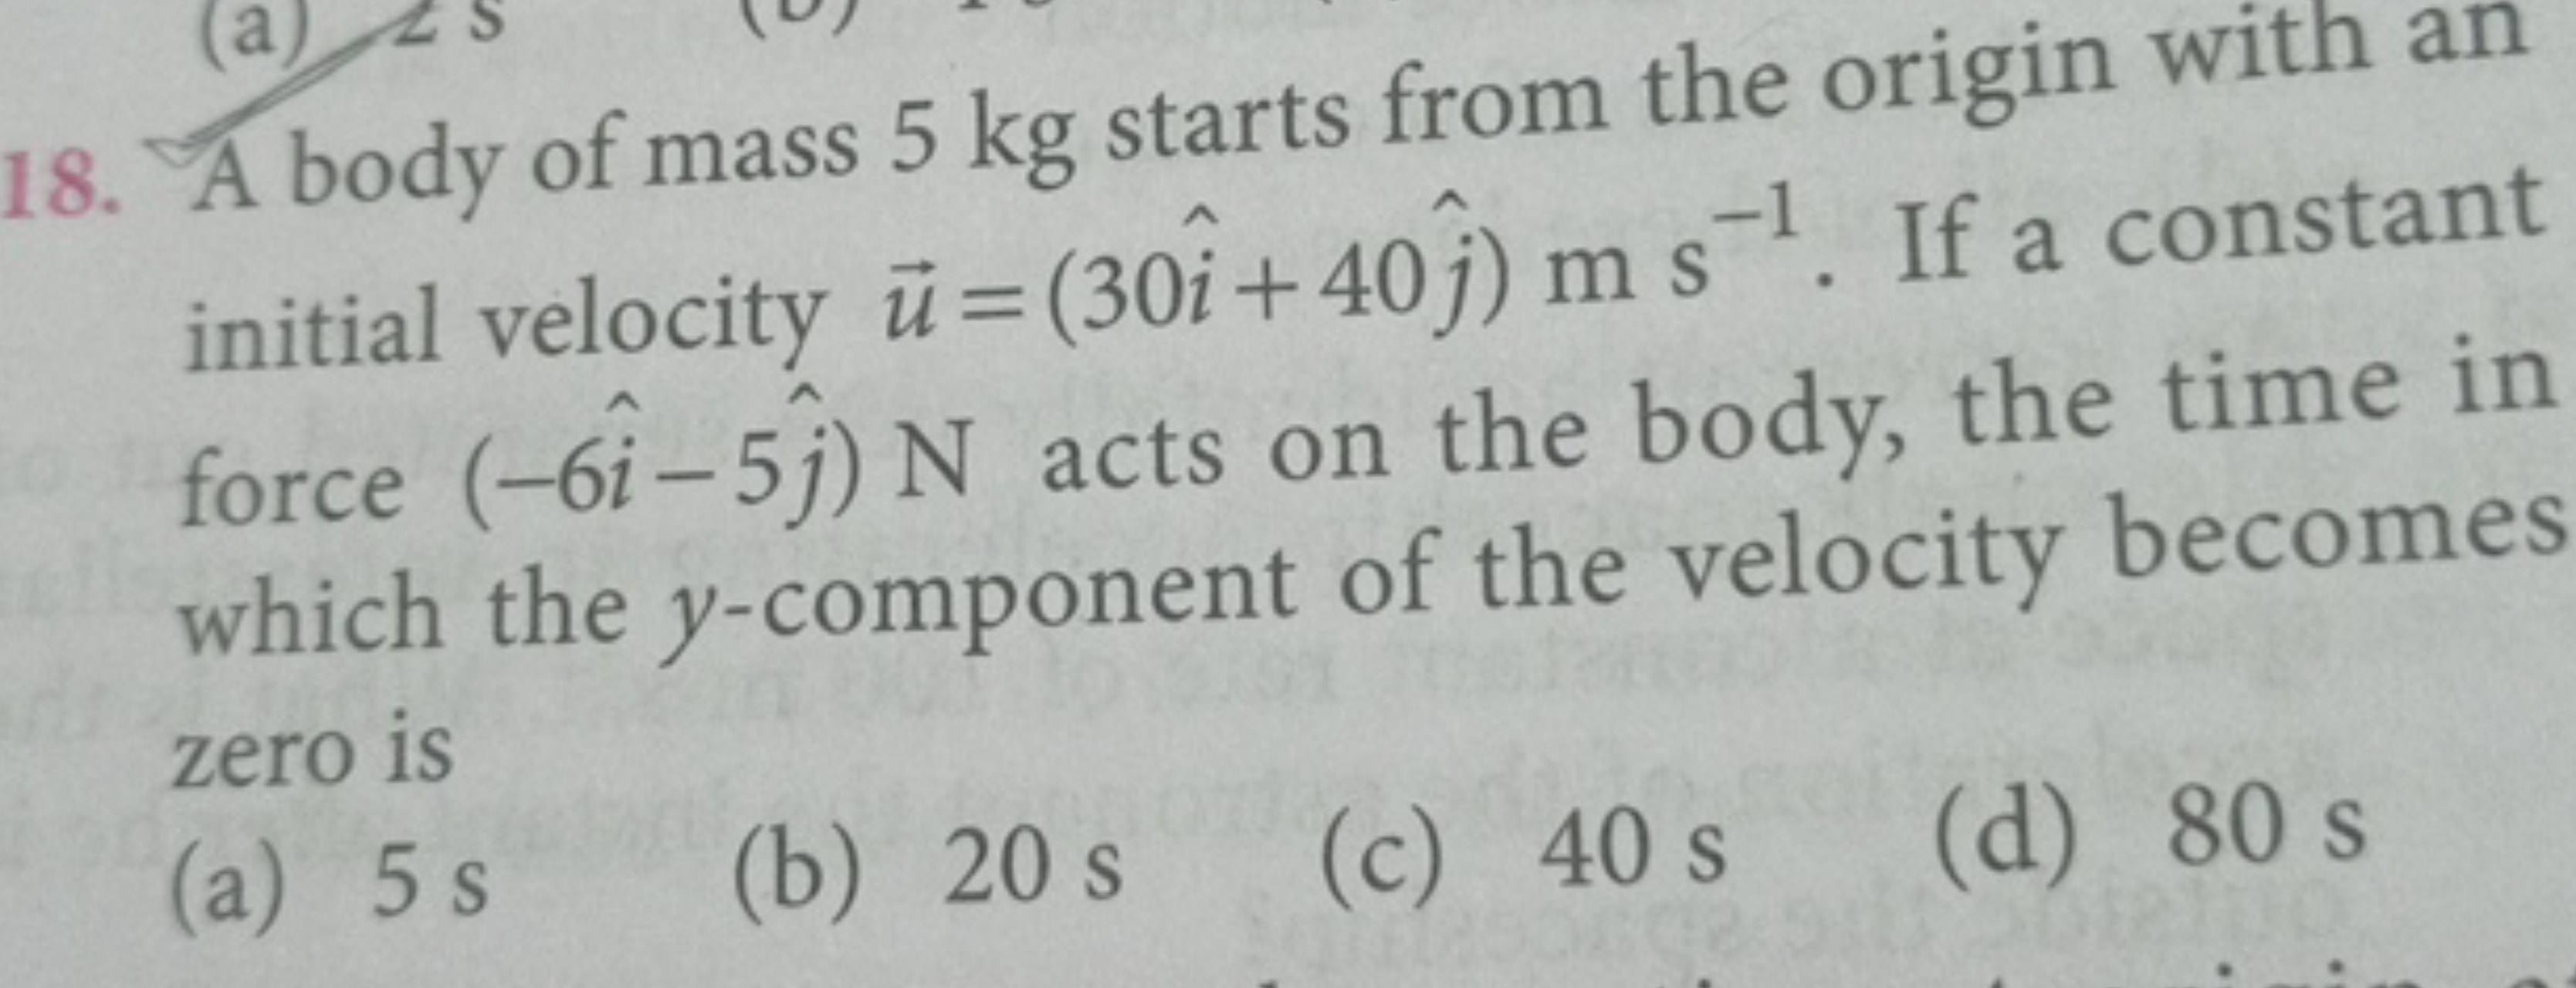 A body of mass 5 kg starts from the origin with an initial velocity u=